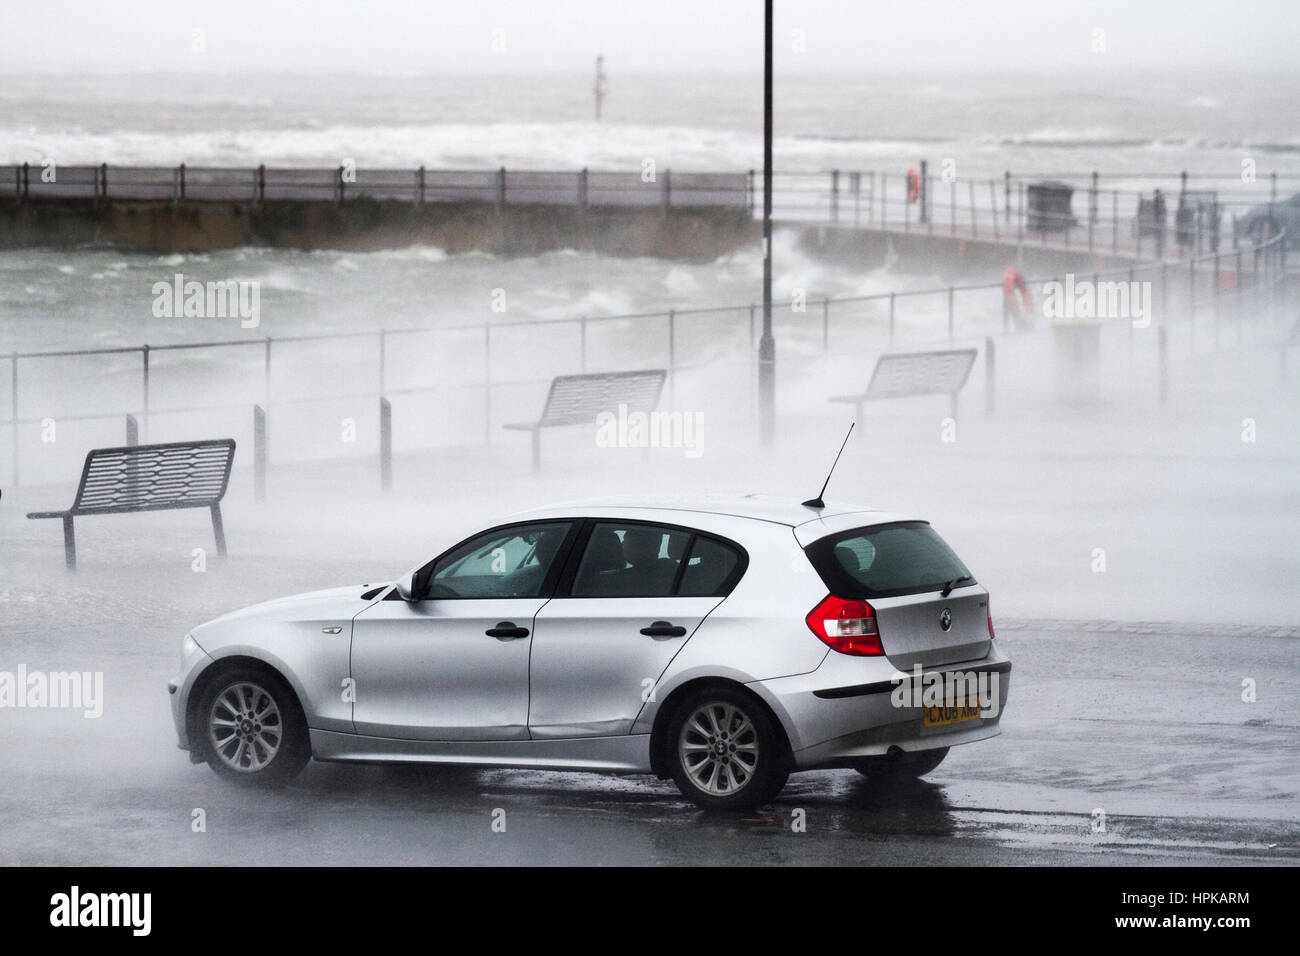 New Brighton, UK. Uk Weather.  23rd February, 2017 Storm winds intensify as motorists queue for a free car wash. Even as the tide recedes the winds intensify as Sorm Doris makes landfall.  The Marine Lake at New Brighton is whipped up to frenzy during the severe storm.  Credit MediaWorldImages/AlamyLiveNews. Stock Photo